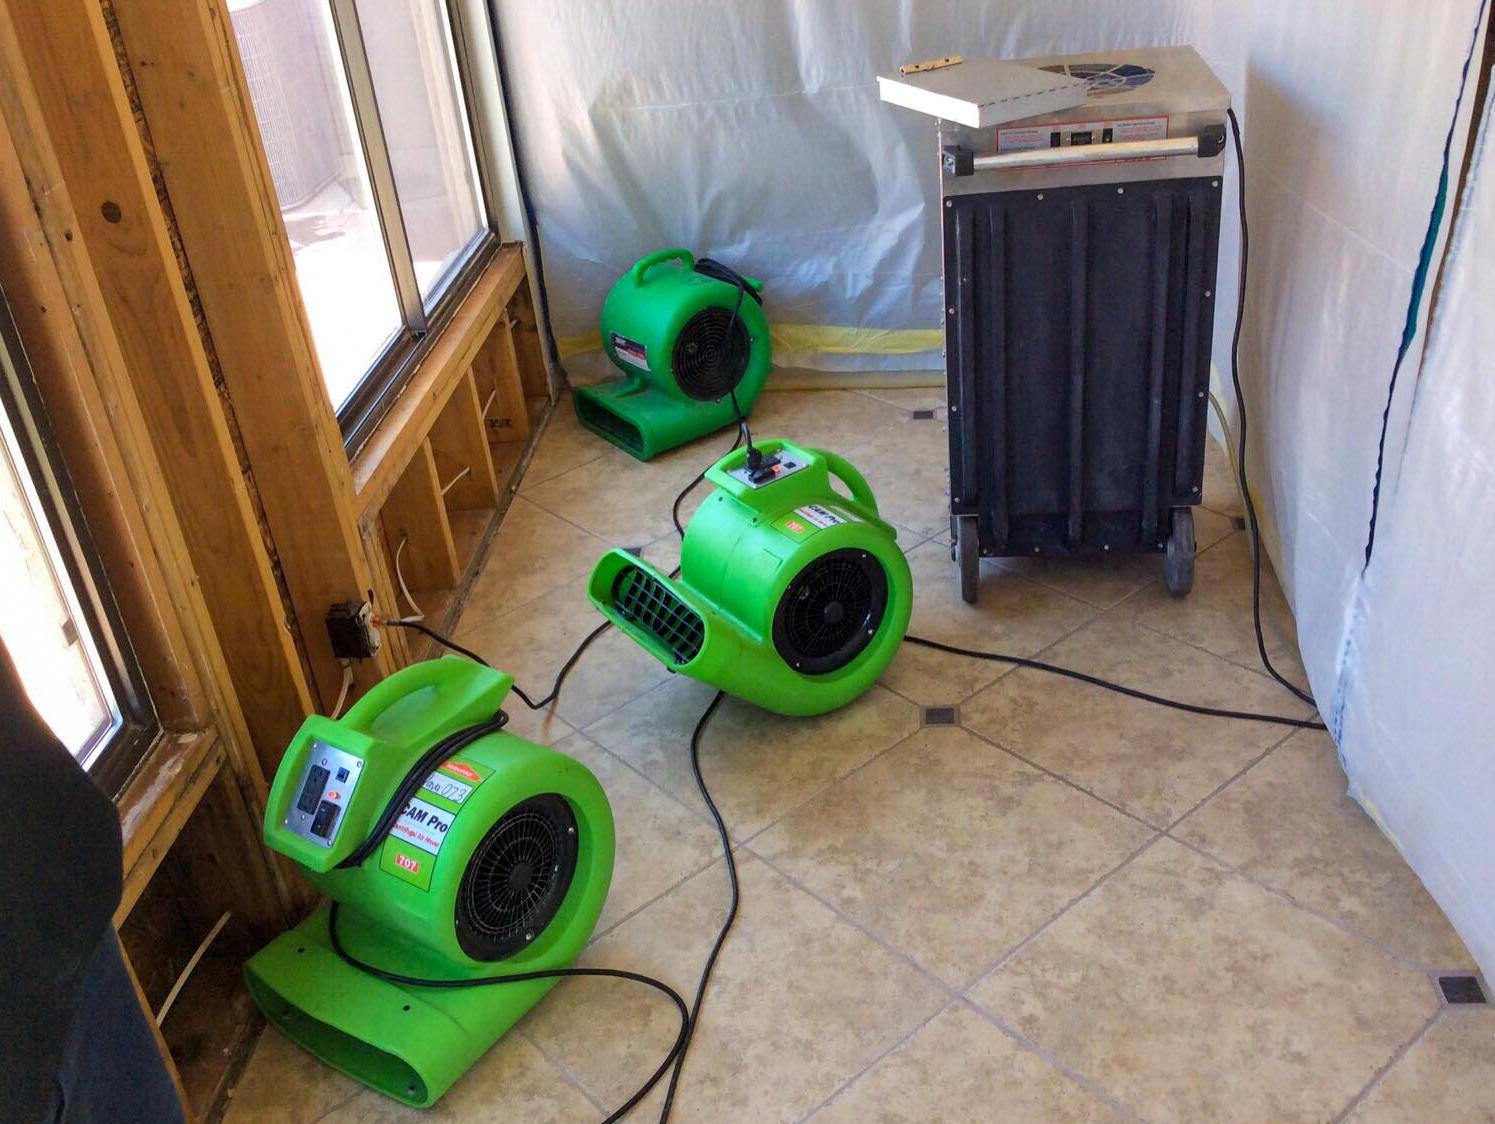 If you have water damage in your Chino Valley, AZ property, it is critical to get SERVPRO of Yavapai County on site immediately, they know how to get the job done efficiently and effectively!